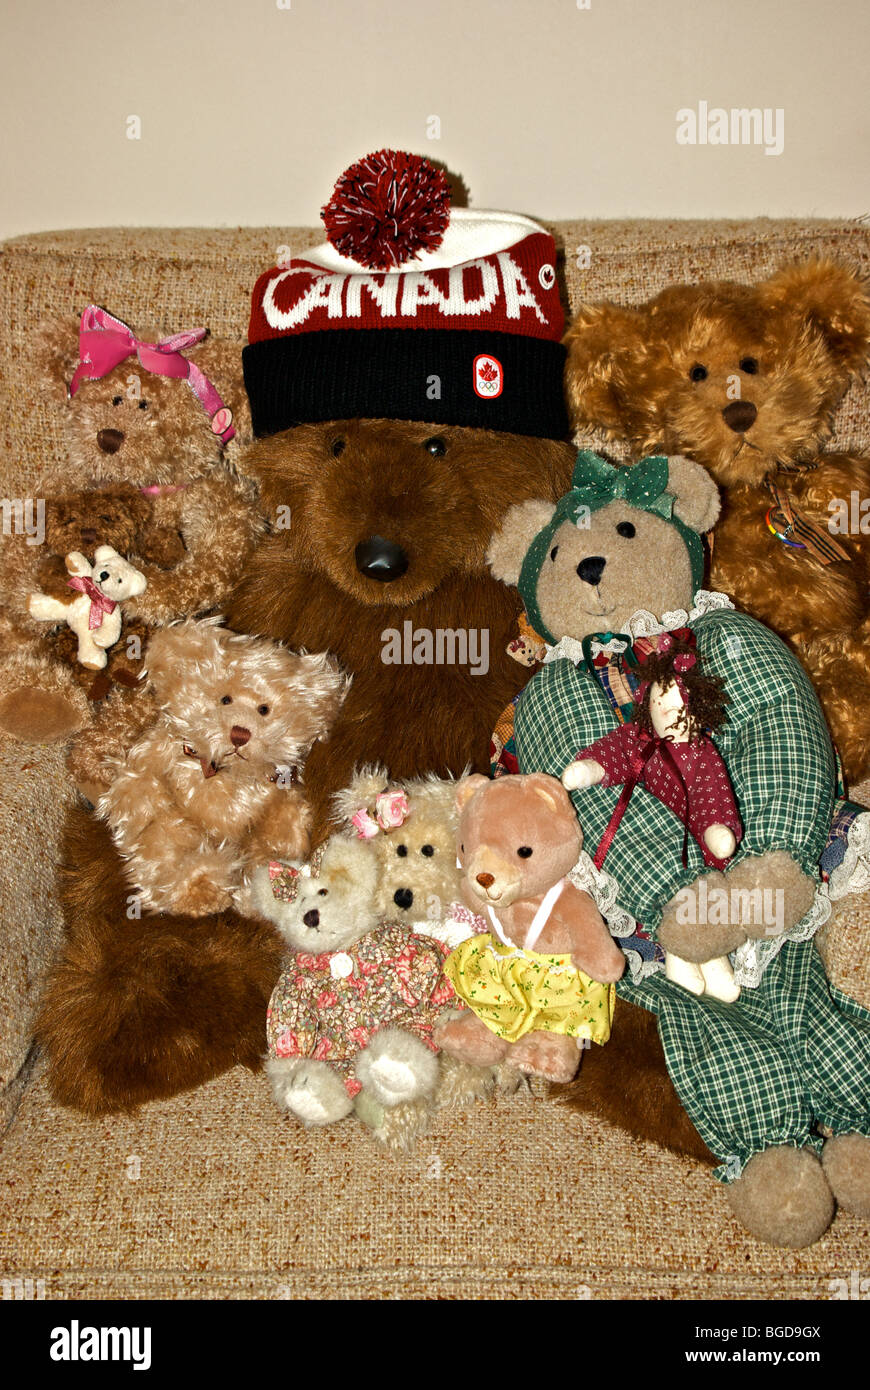 Teddy bear wearing official 2010 Winter Olympics Hudson's Bay Canada Toque with family Stock Photo